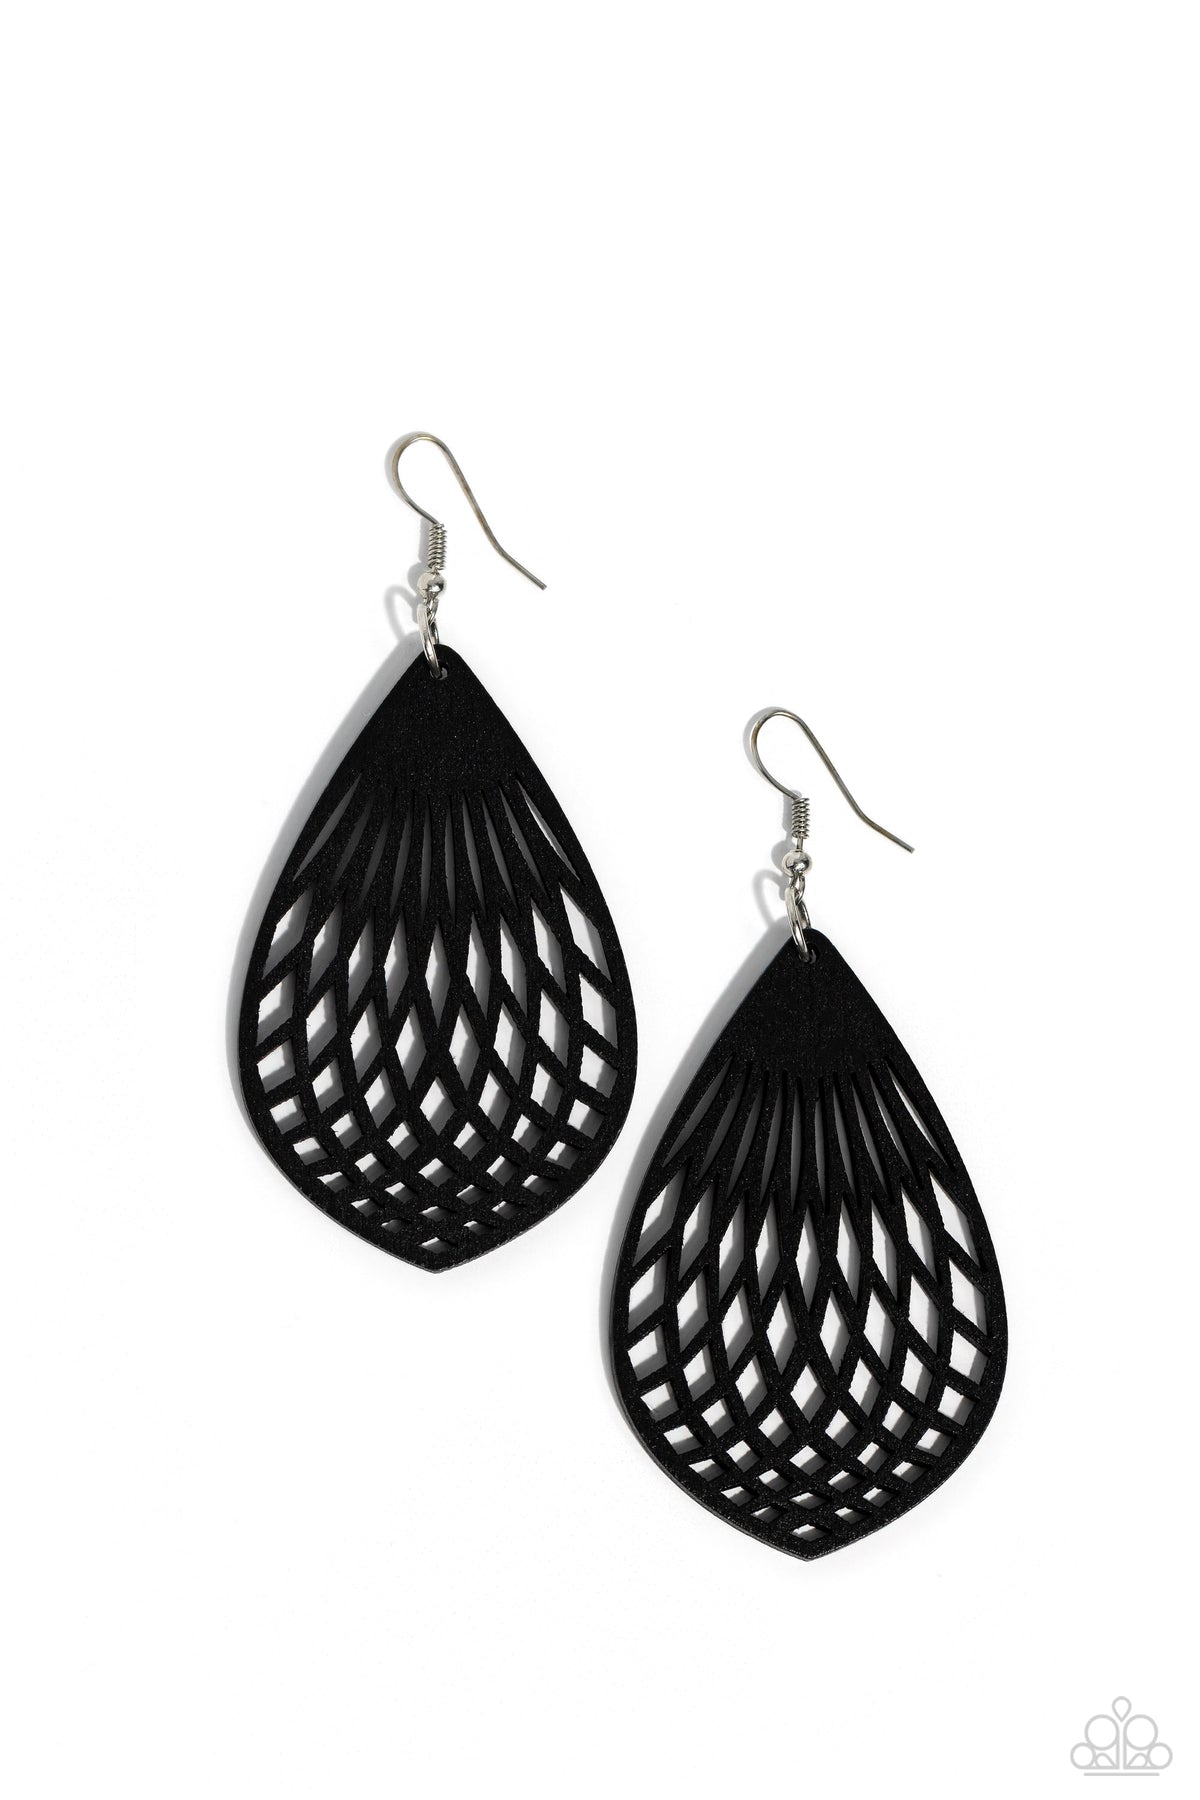 Caribbean Coral Black Wood Earrings - Paparazzi Accessories- lightbox - CarasShop.com - $5 Jewelry by Cara Jewels